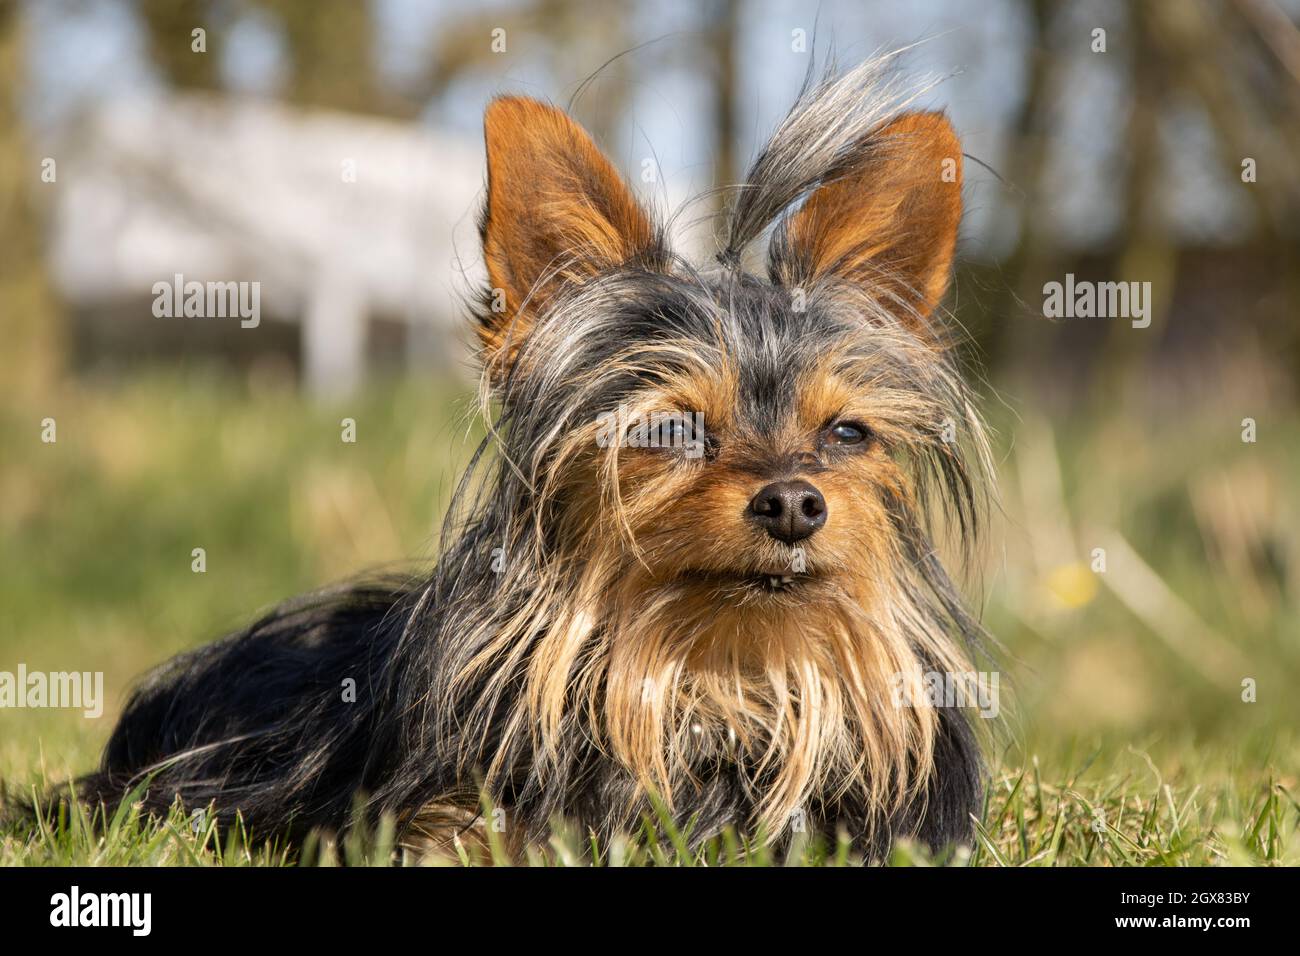 Cute Chihuahua Yorkshire terrier puppy portrait Stock Photo